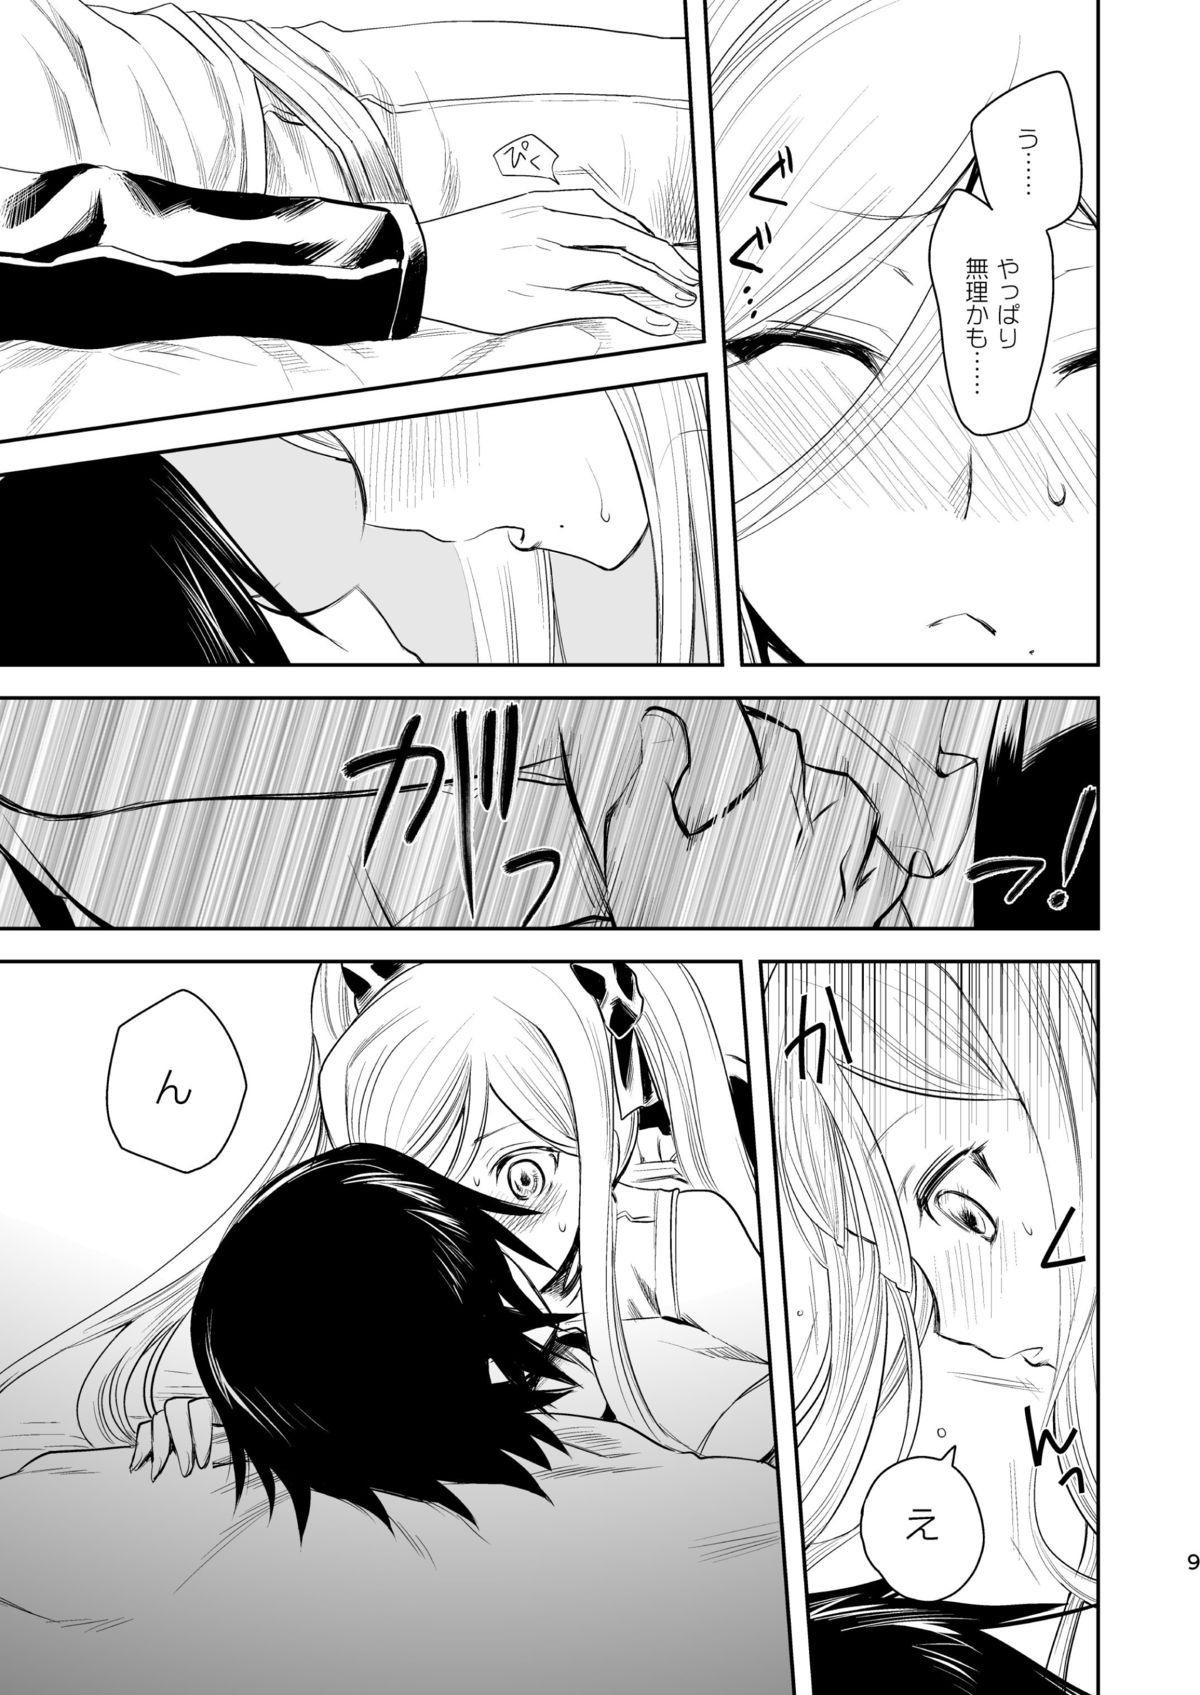 Penetration Now Updating! - Arpeggio of blue steel Filipina - Page 8